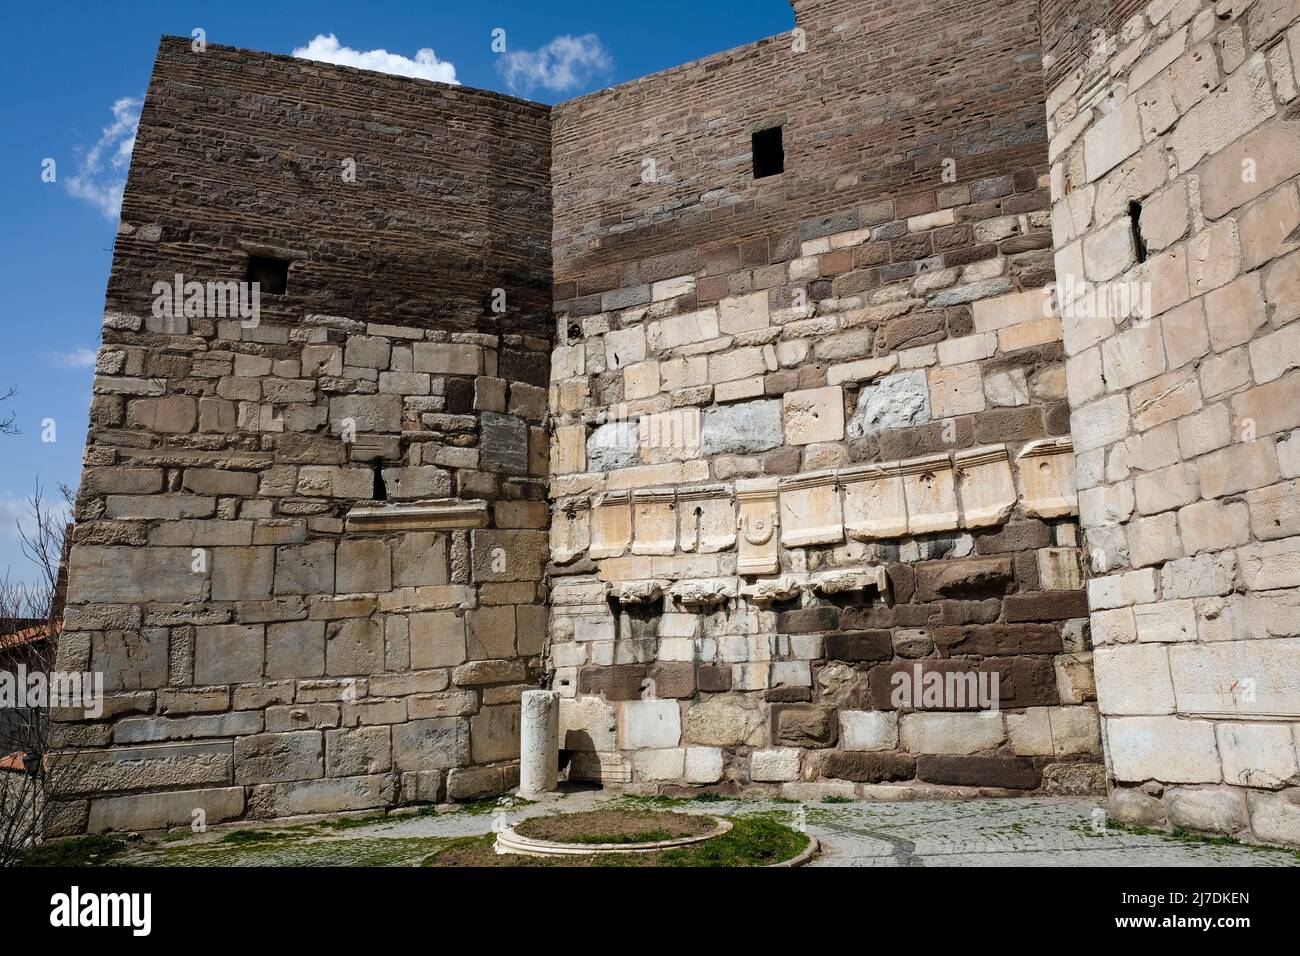 In the 8th and 9th centuries, marble blocks of Roman monuments, column capitals, marble gutters of waterways were used to repair the Ankara castle. vi Stock Photo